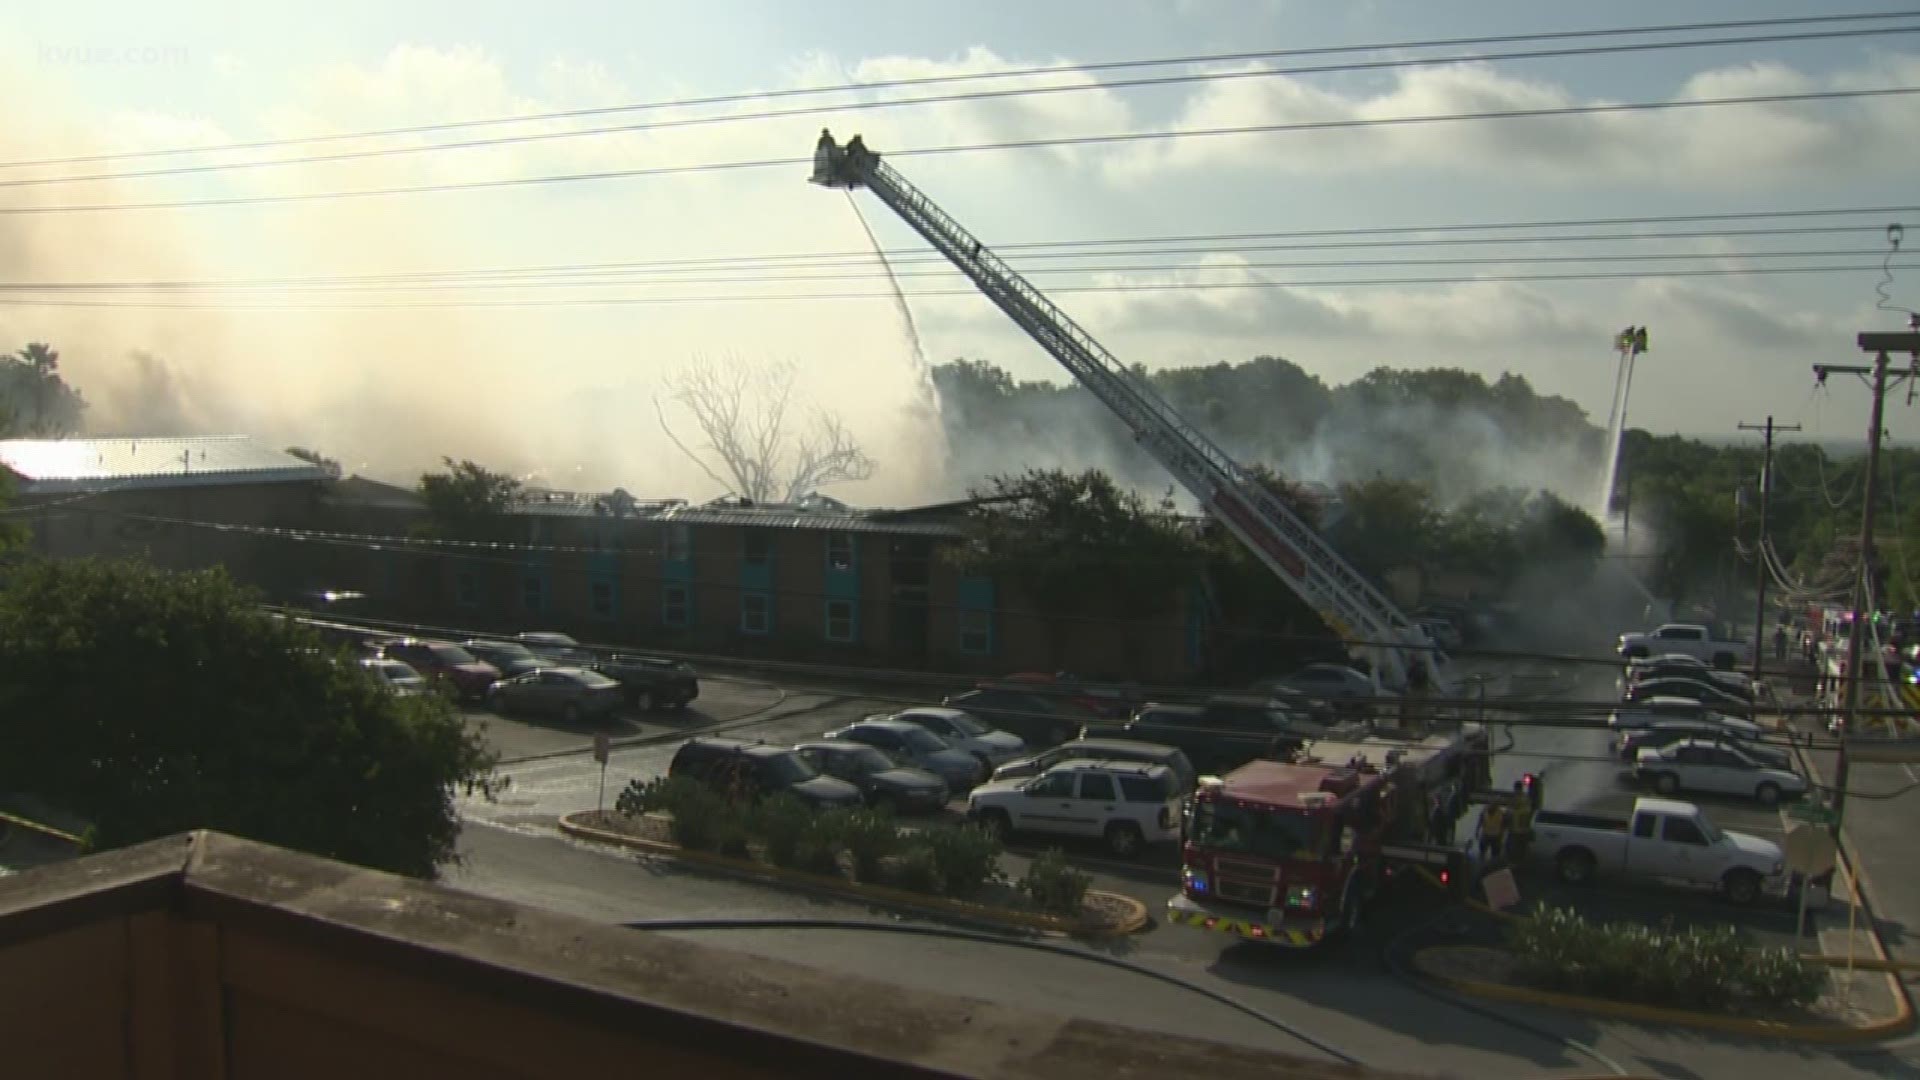 Officials said at least 200 residents were affected by the fire and about 110 units were affected. 